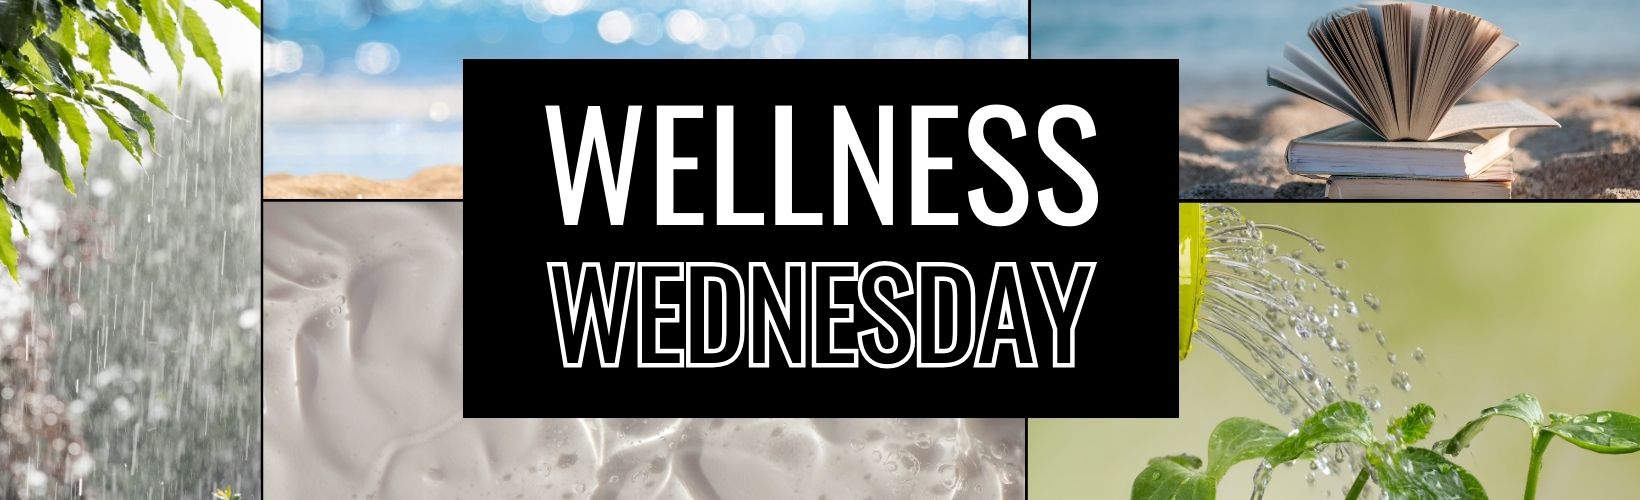 Wellness Wednesday: How to Recover from Shopping Stress and Overwhelm